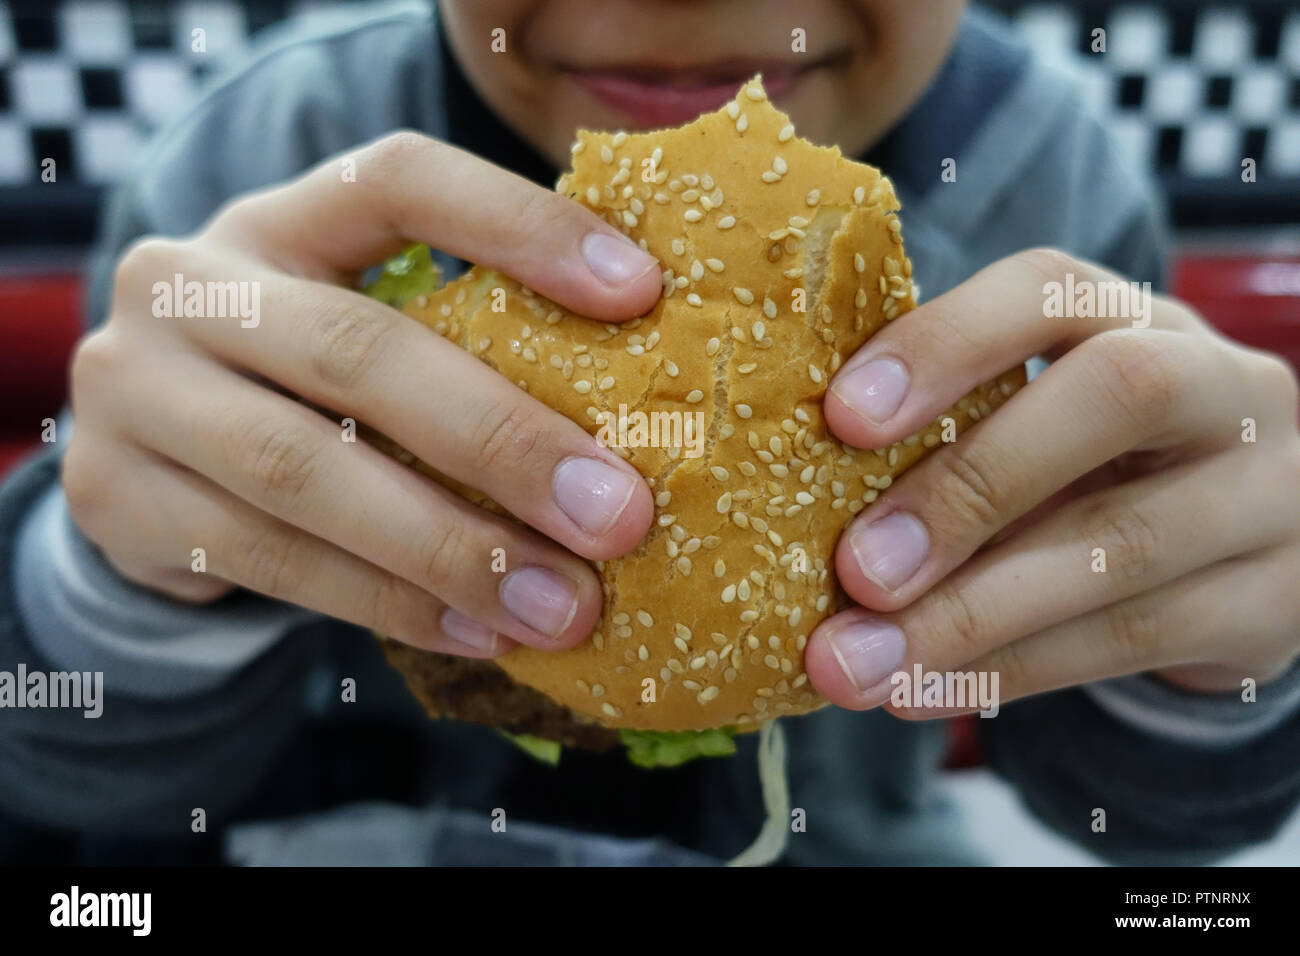 Young person eating burger Stock Photo